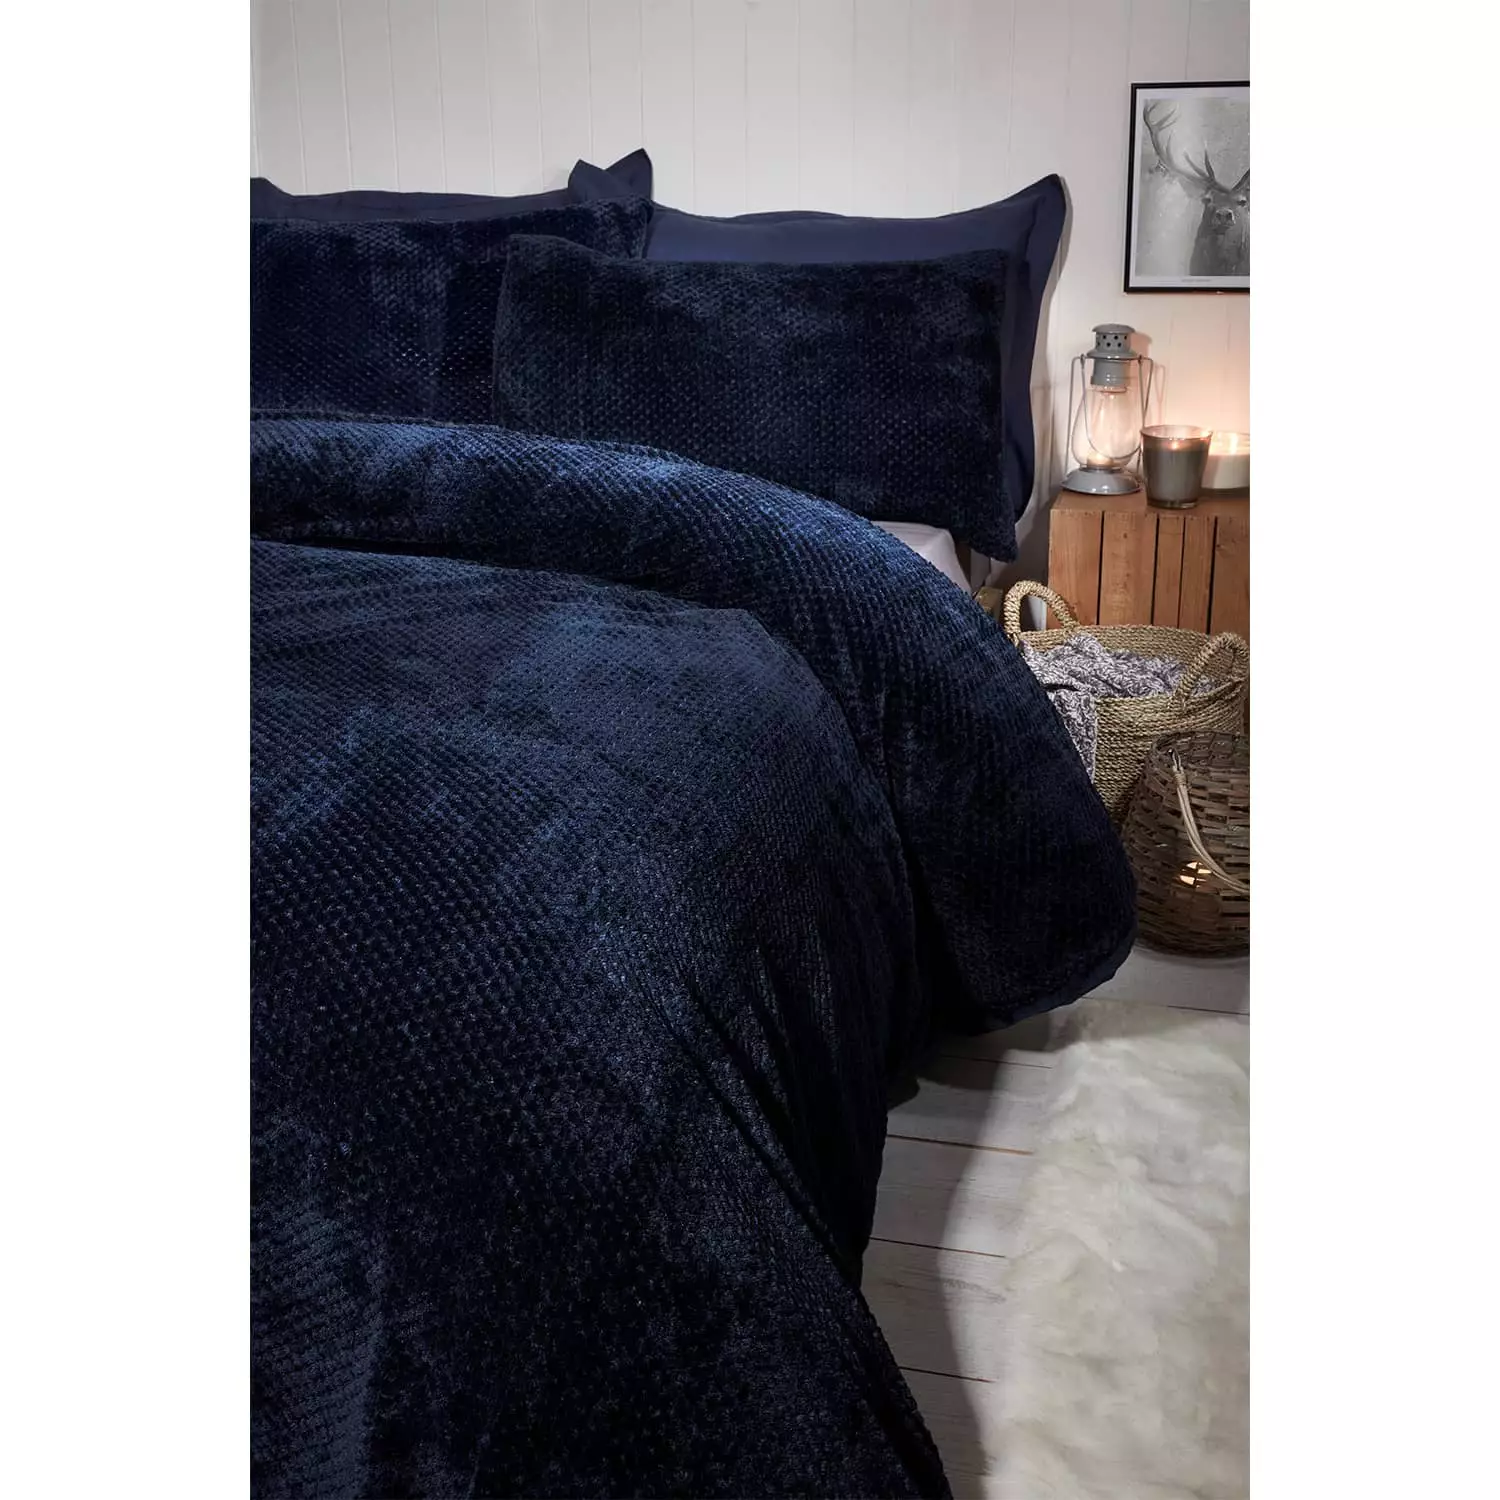 The duvet covers also come in a navy colour (